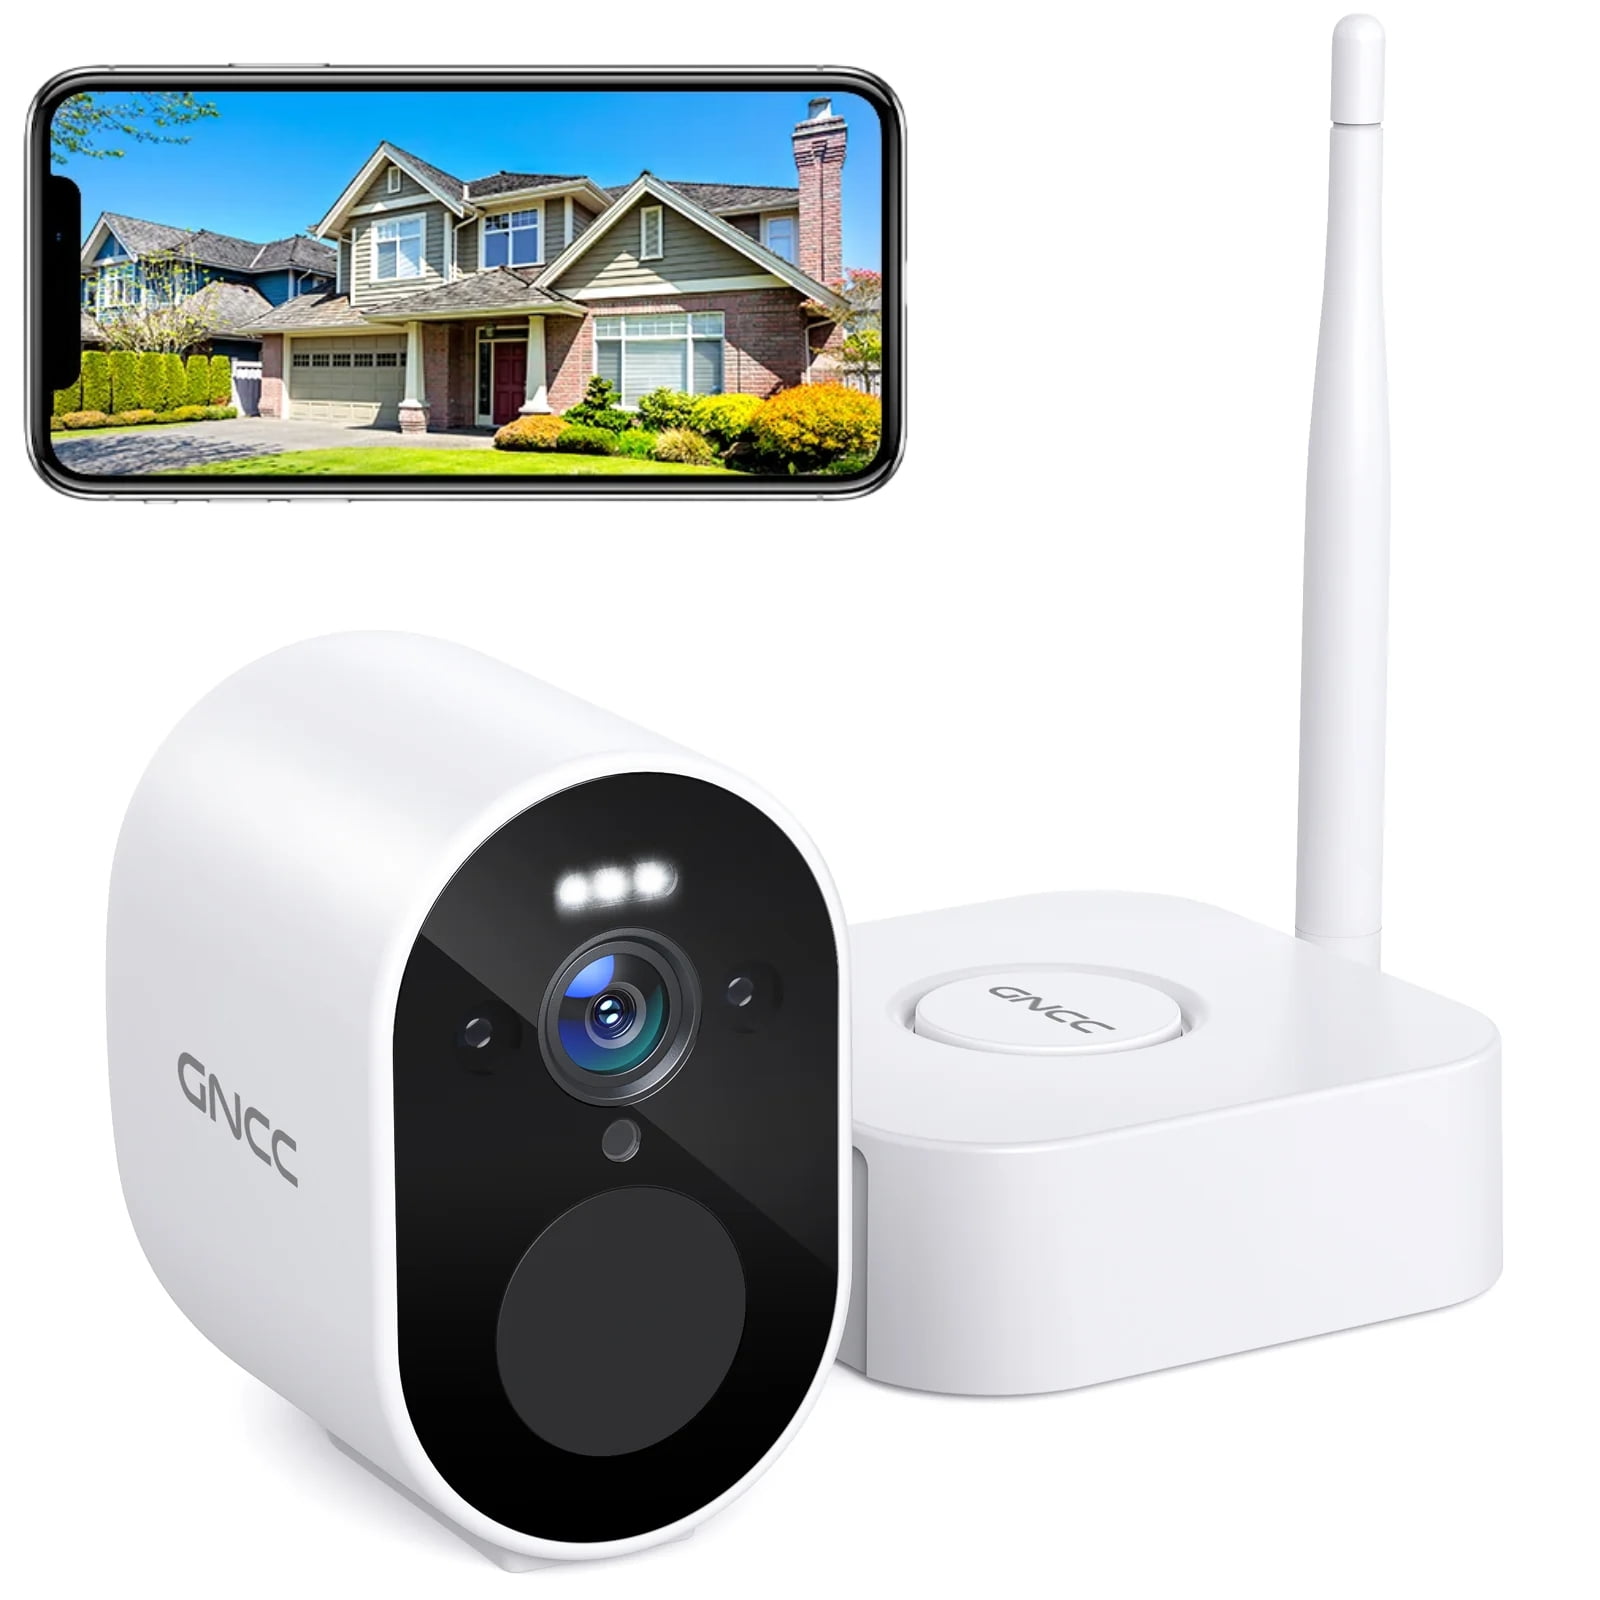 Wireless Security Camera Setup with WiFi Router